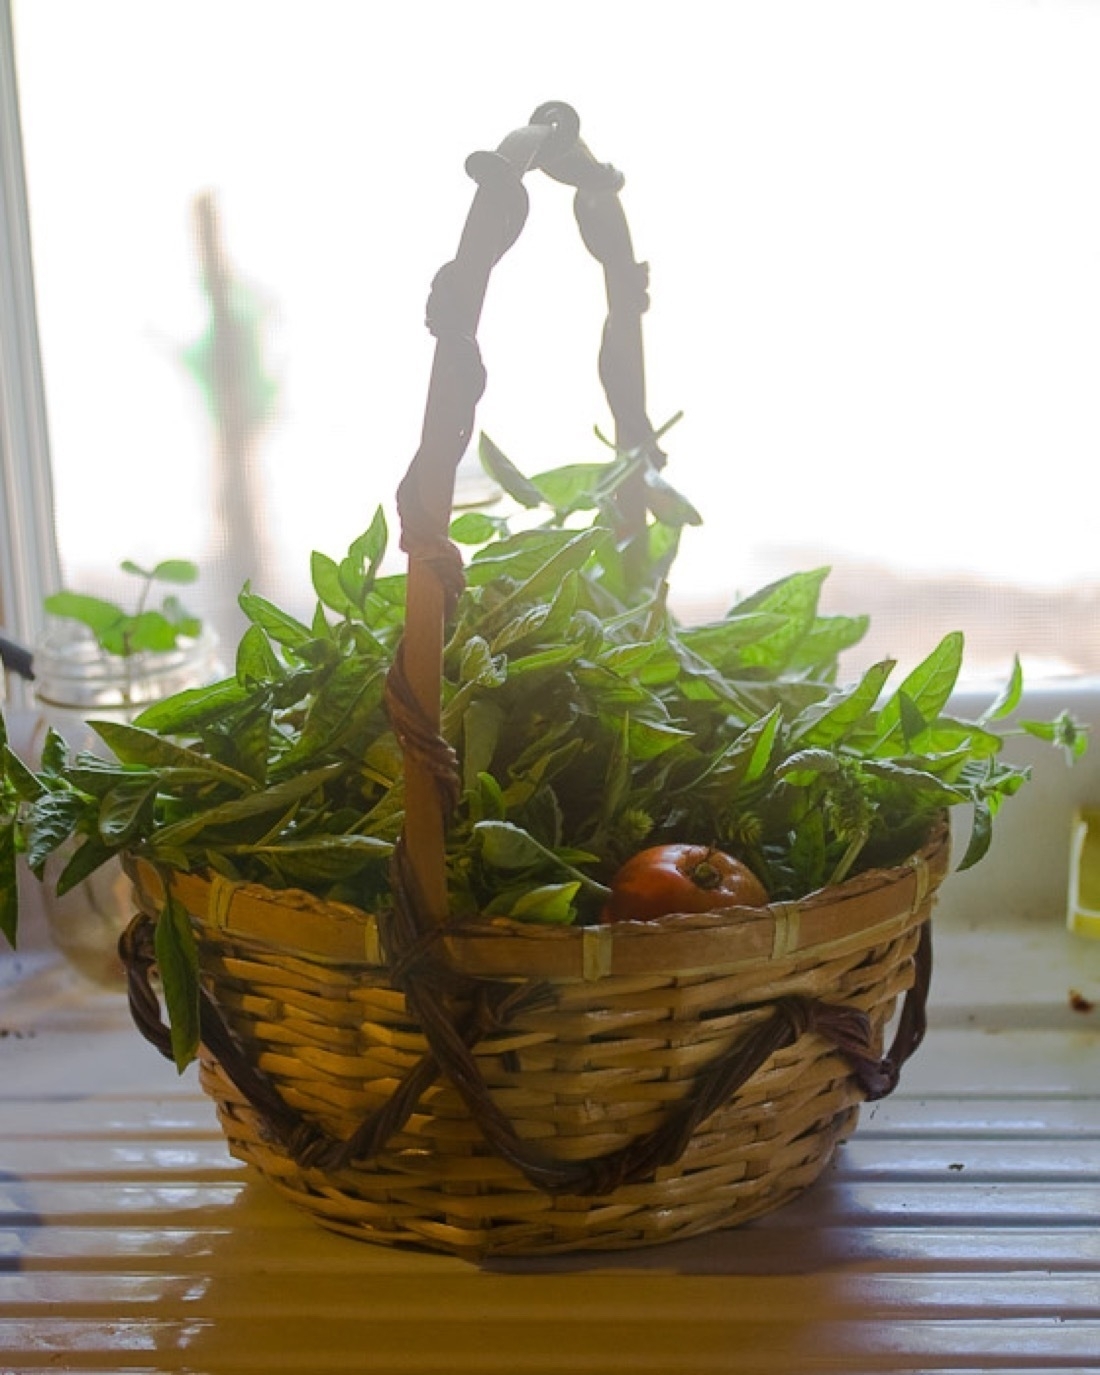 A basket filled with freshly cut green basil and one tomato